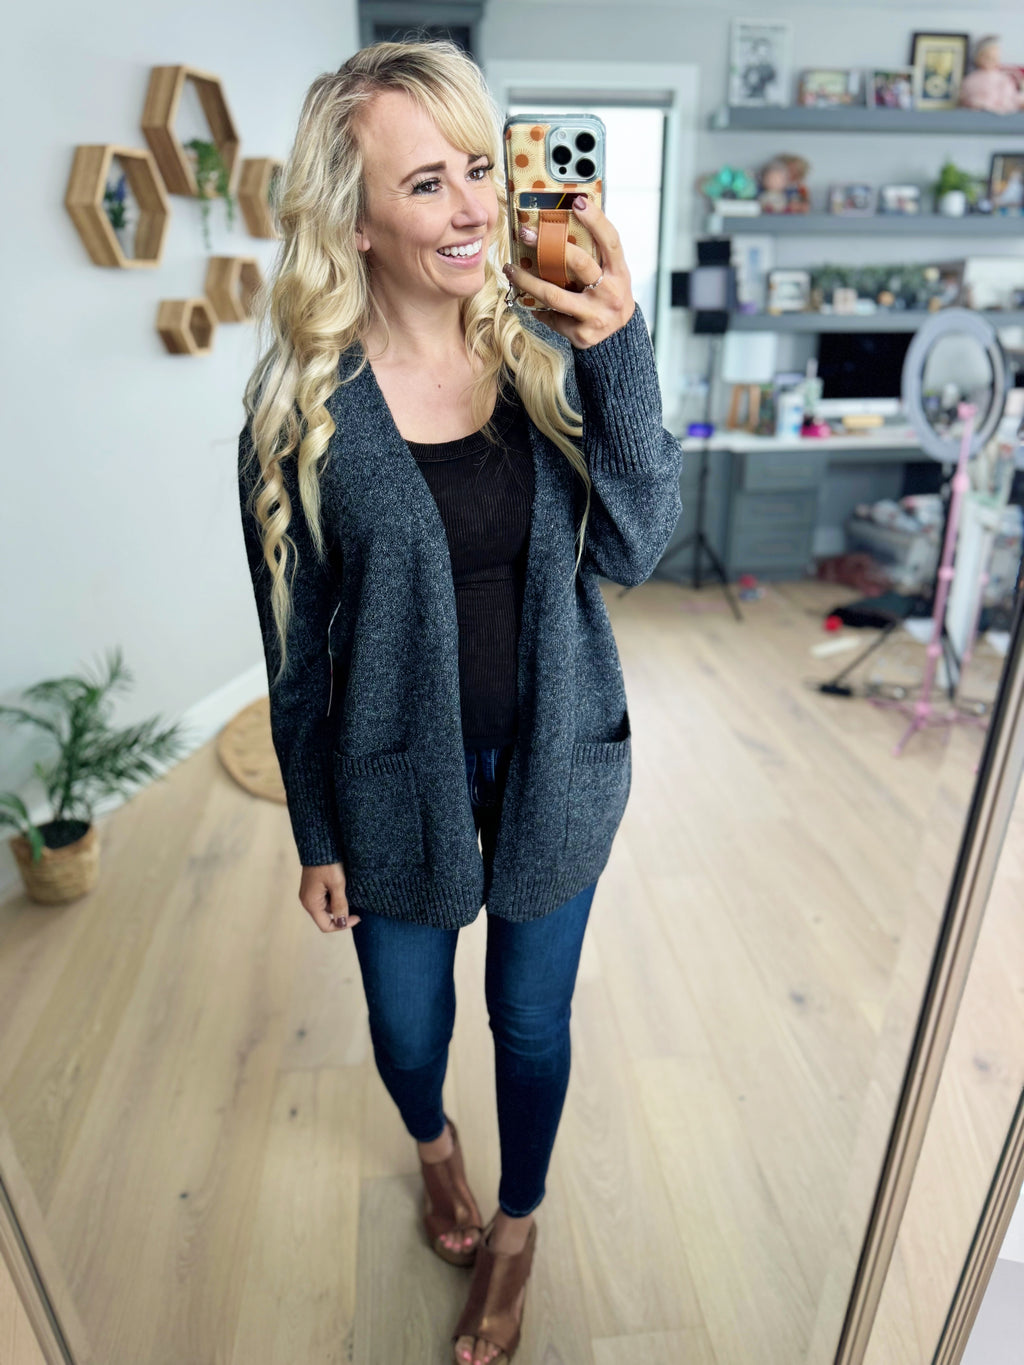 Must Have Cardigan in Charcoal